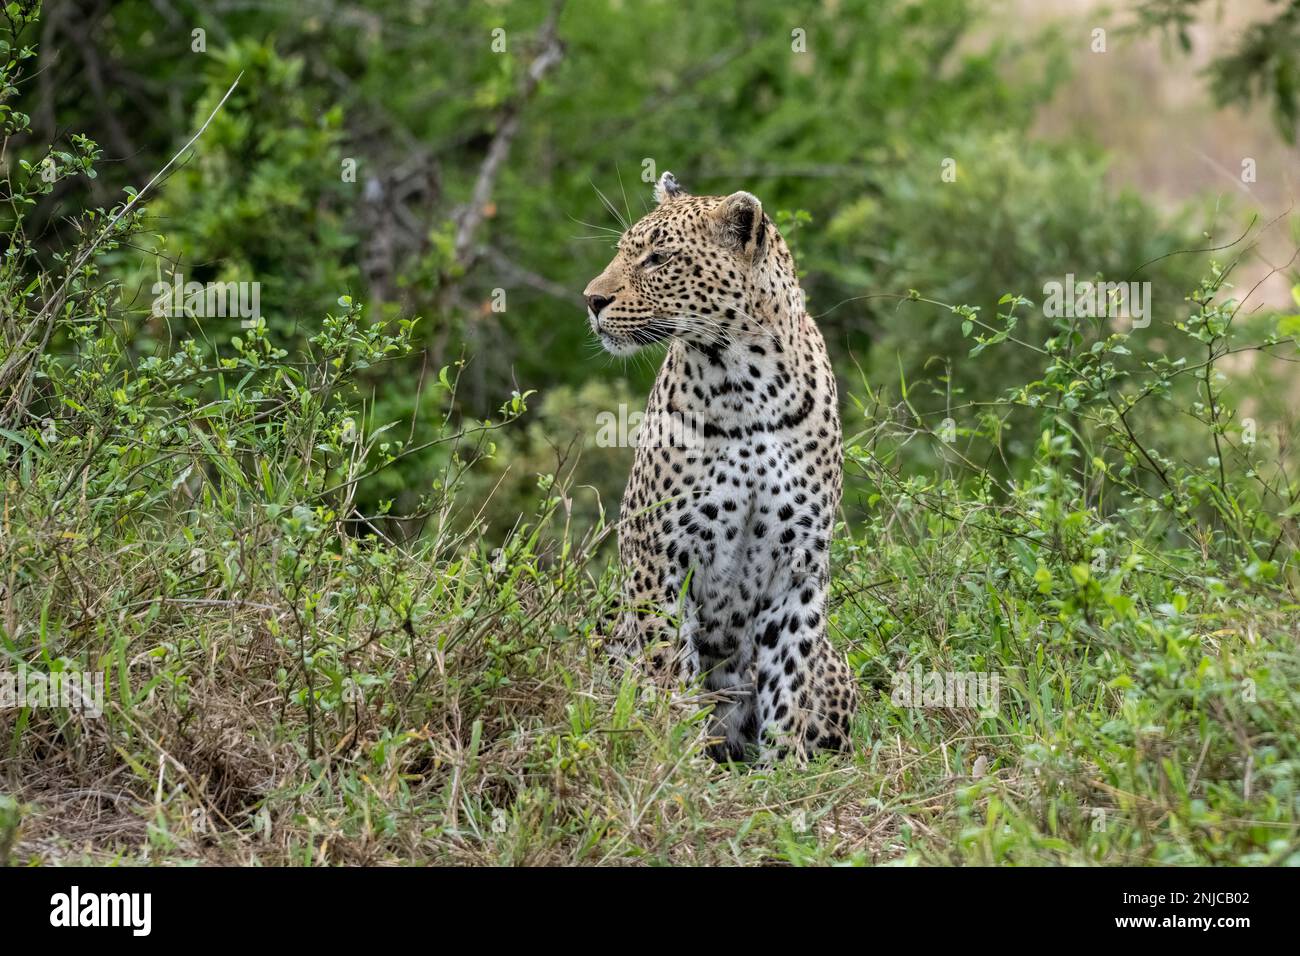 Leopard sitting amongst a Cluster of Bushes in South Africa Stock Photo